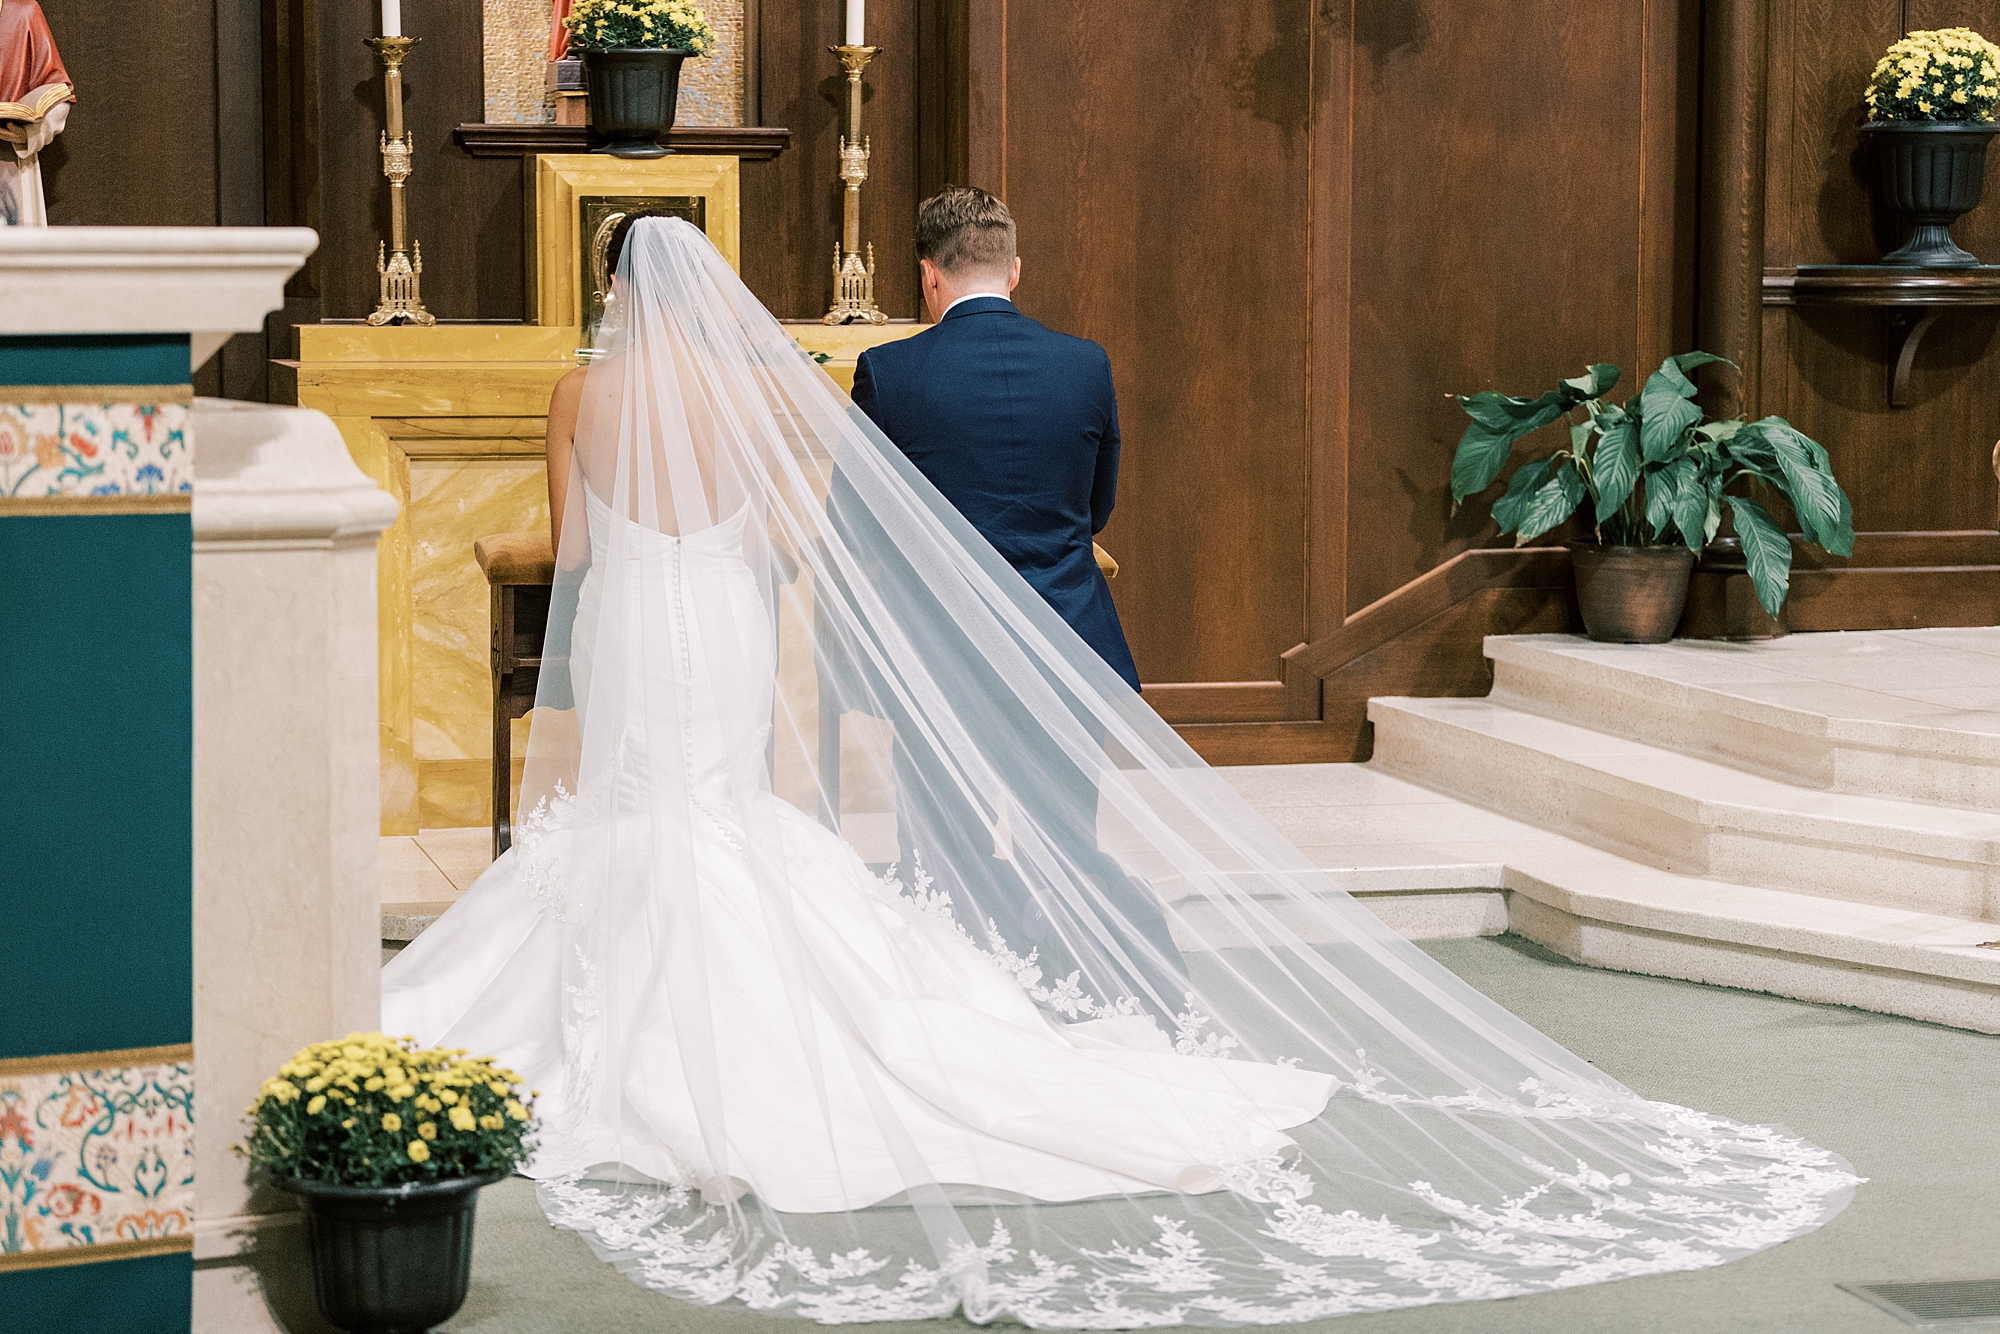 bride and groom pray during traditional wedding ceremony at Philadelphia PA church